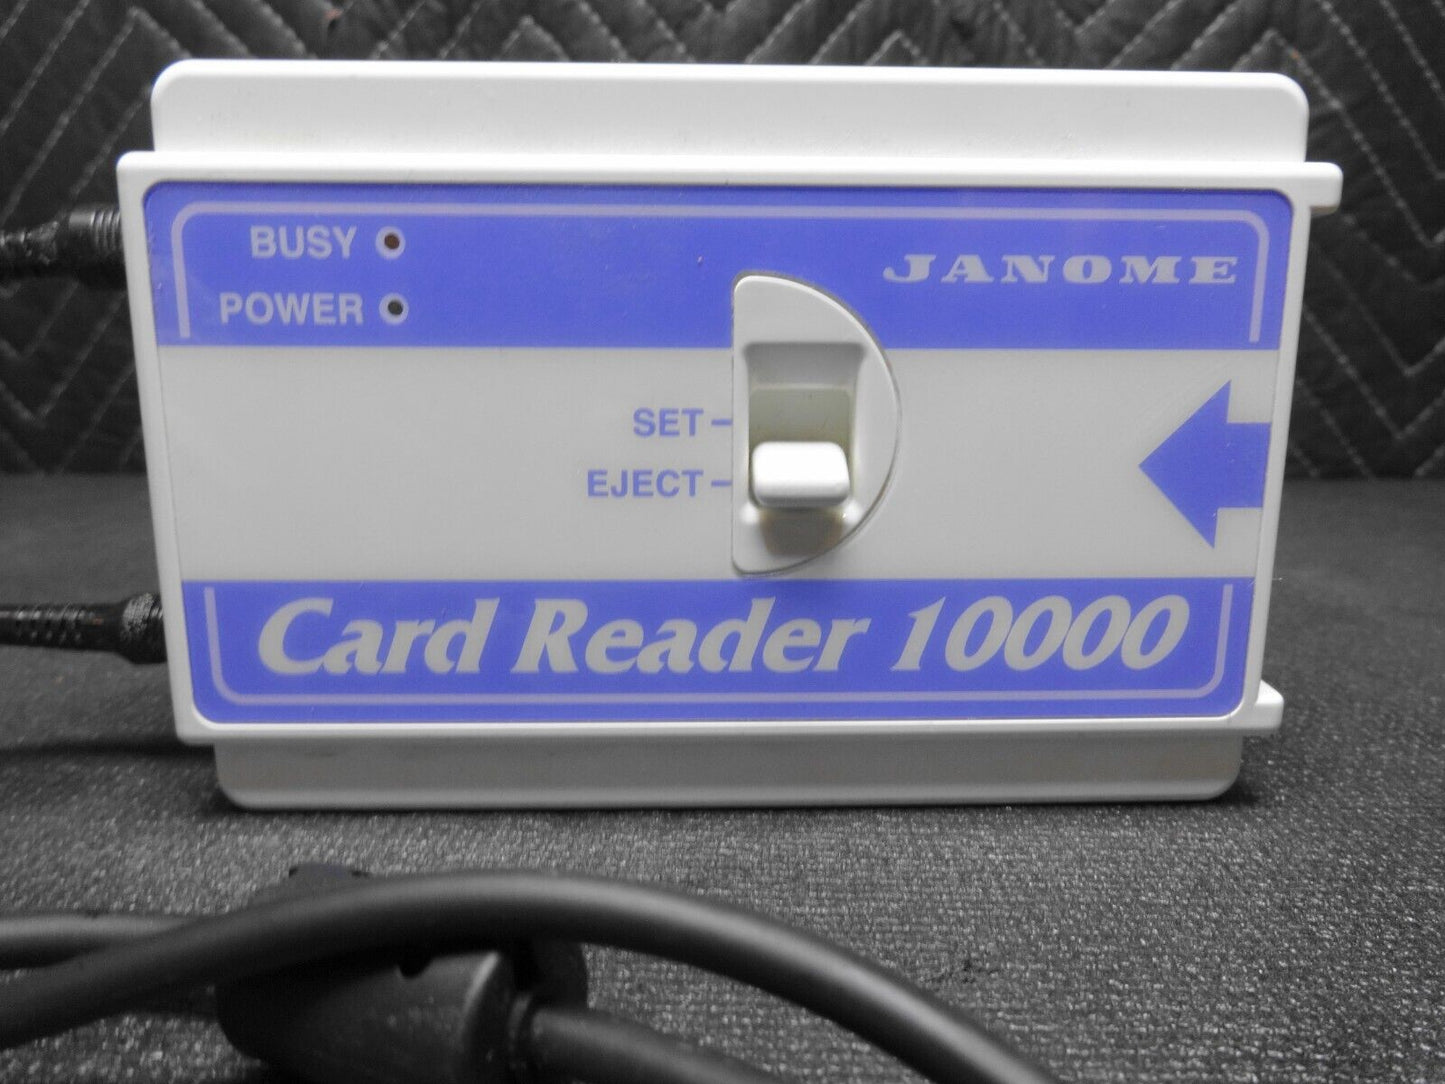 Janome Card Reader 10000 Memory Craft 10000/10001/9500 Sewing Embroidery Machine